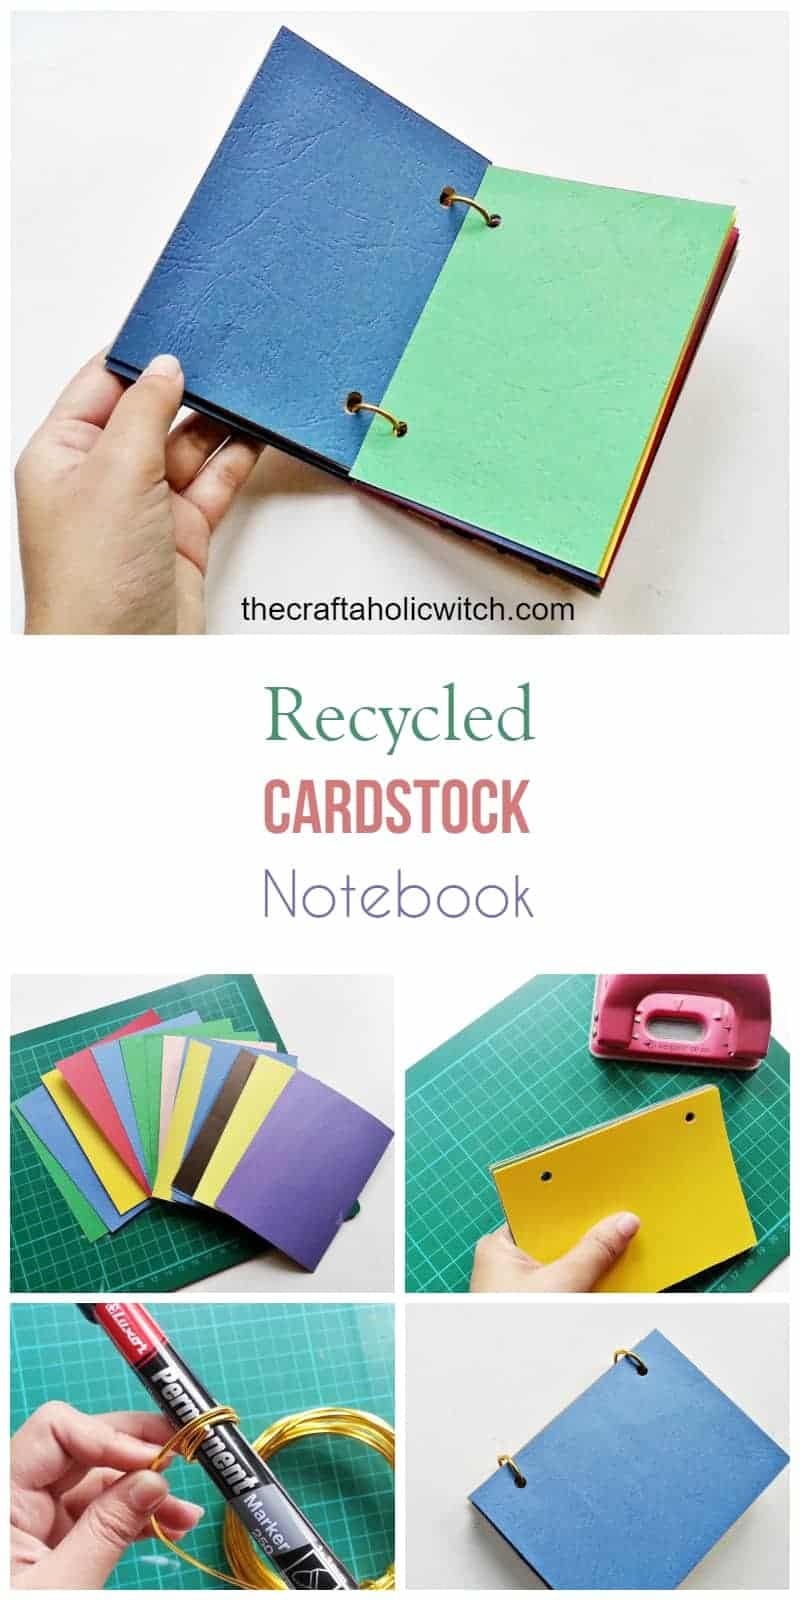 recycled cardstock pin image - DIY Recycled Cardstock Notebook